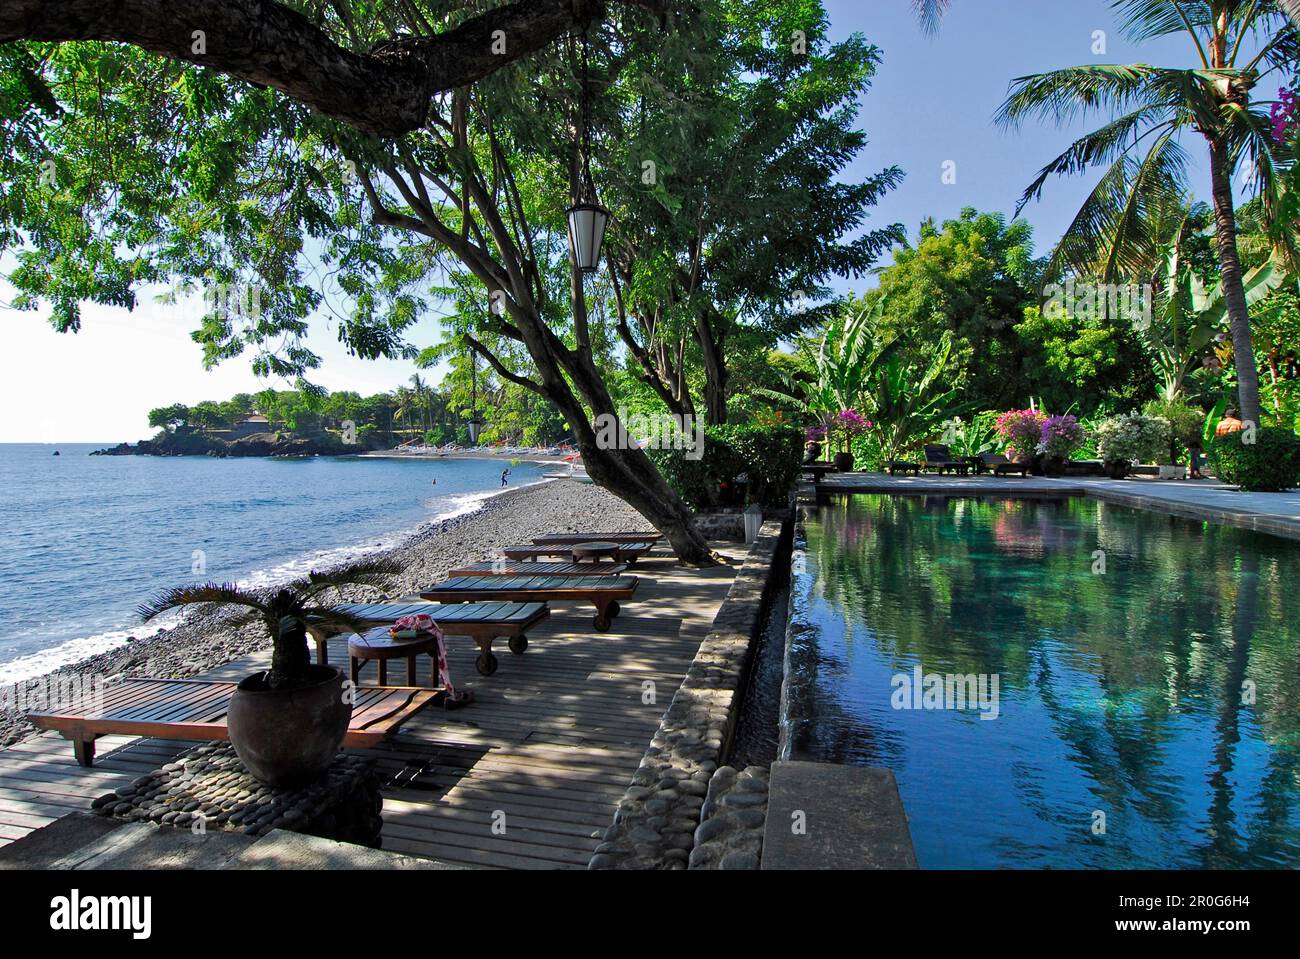 Deserted pool under palm trees at the beach, Mimpi Resort at Tulamben, North East Bali, Indonesia, Asia Stock Photo